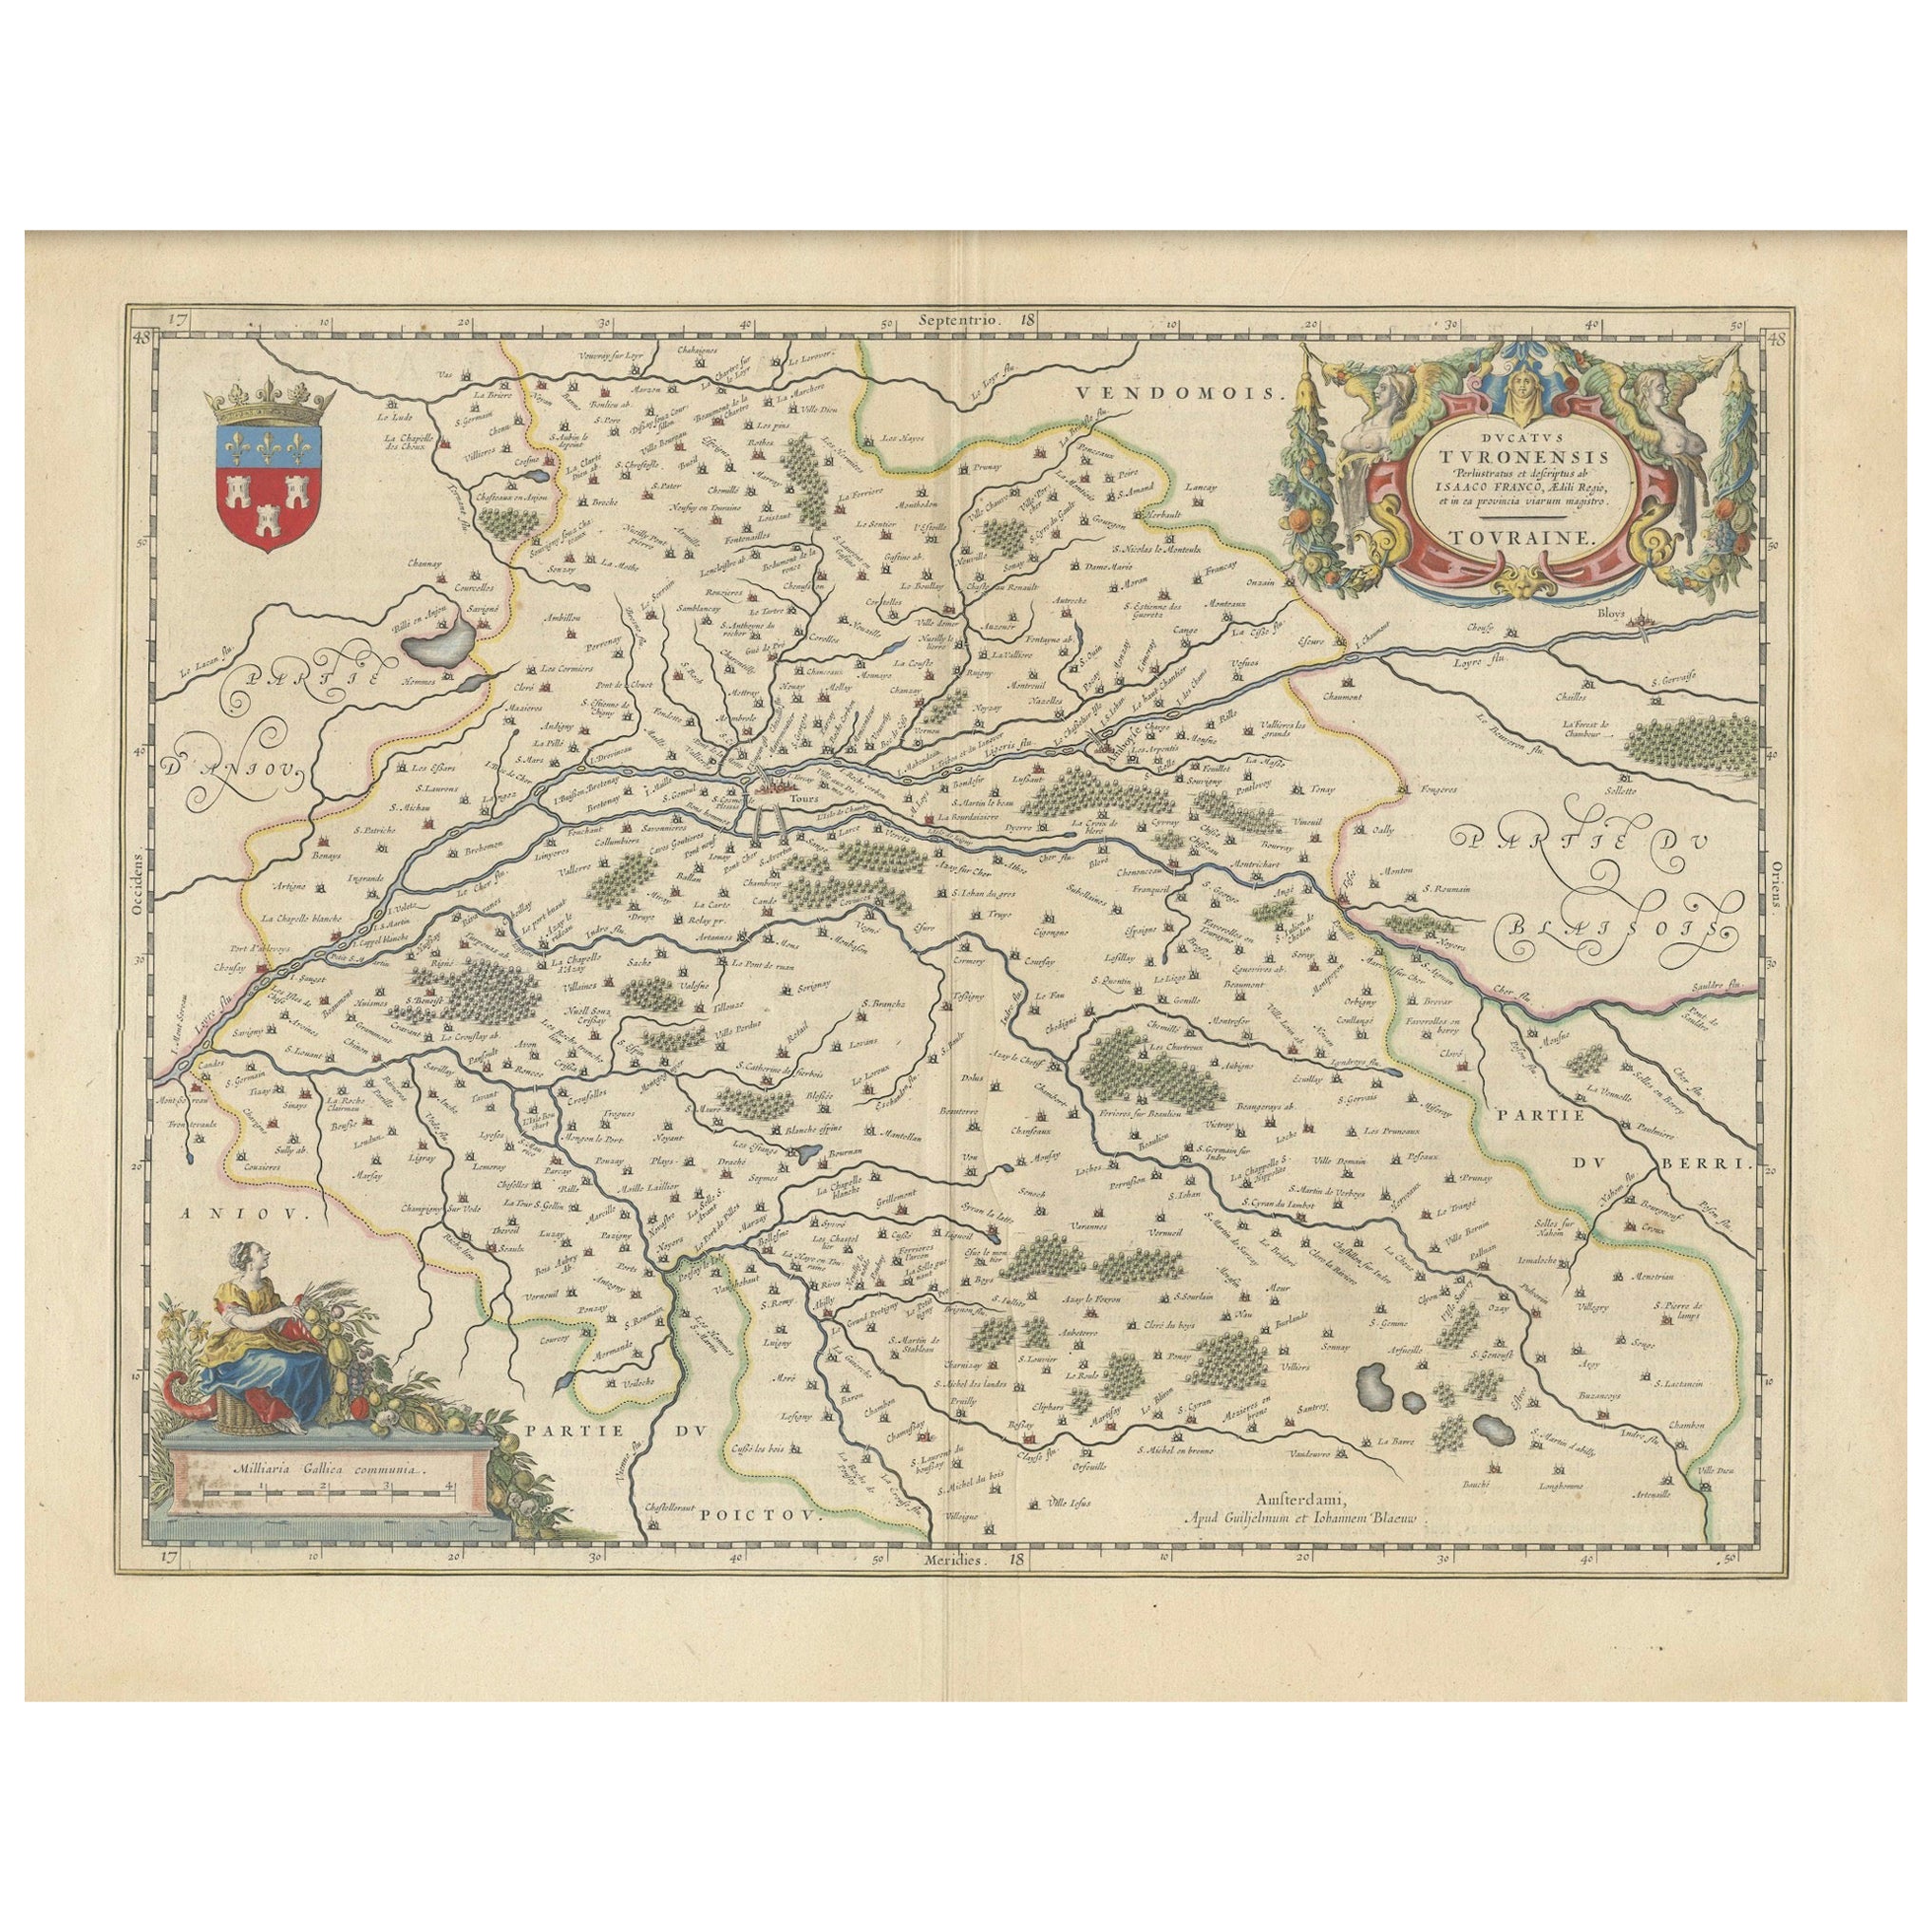 Cartographic Elegance of Touraine: A 17th-Century Map Showing French Heritage